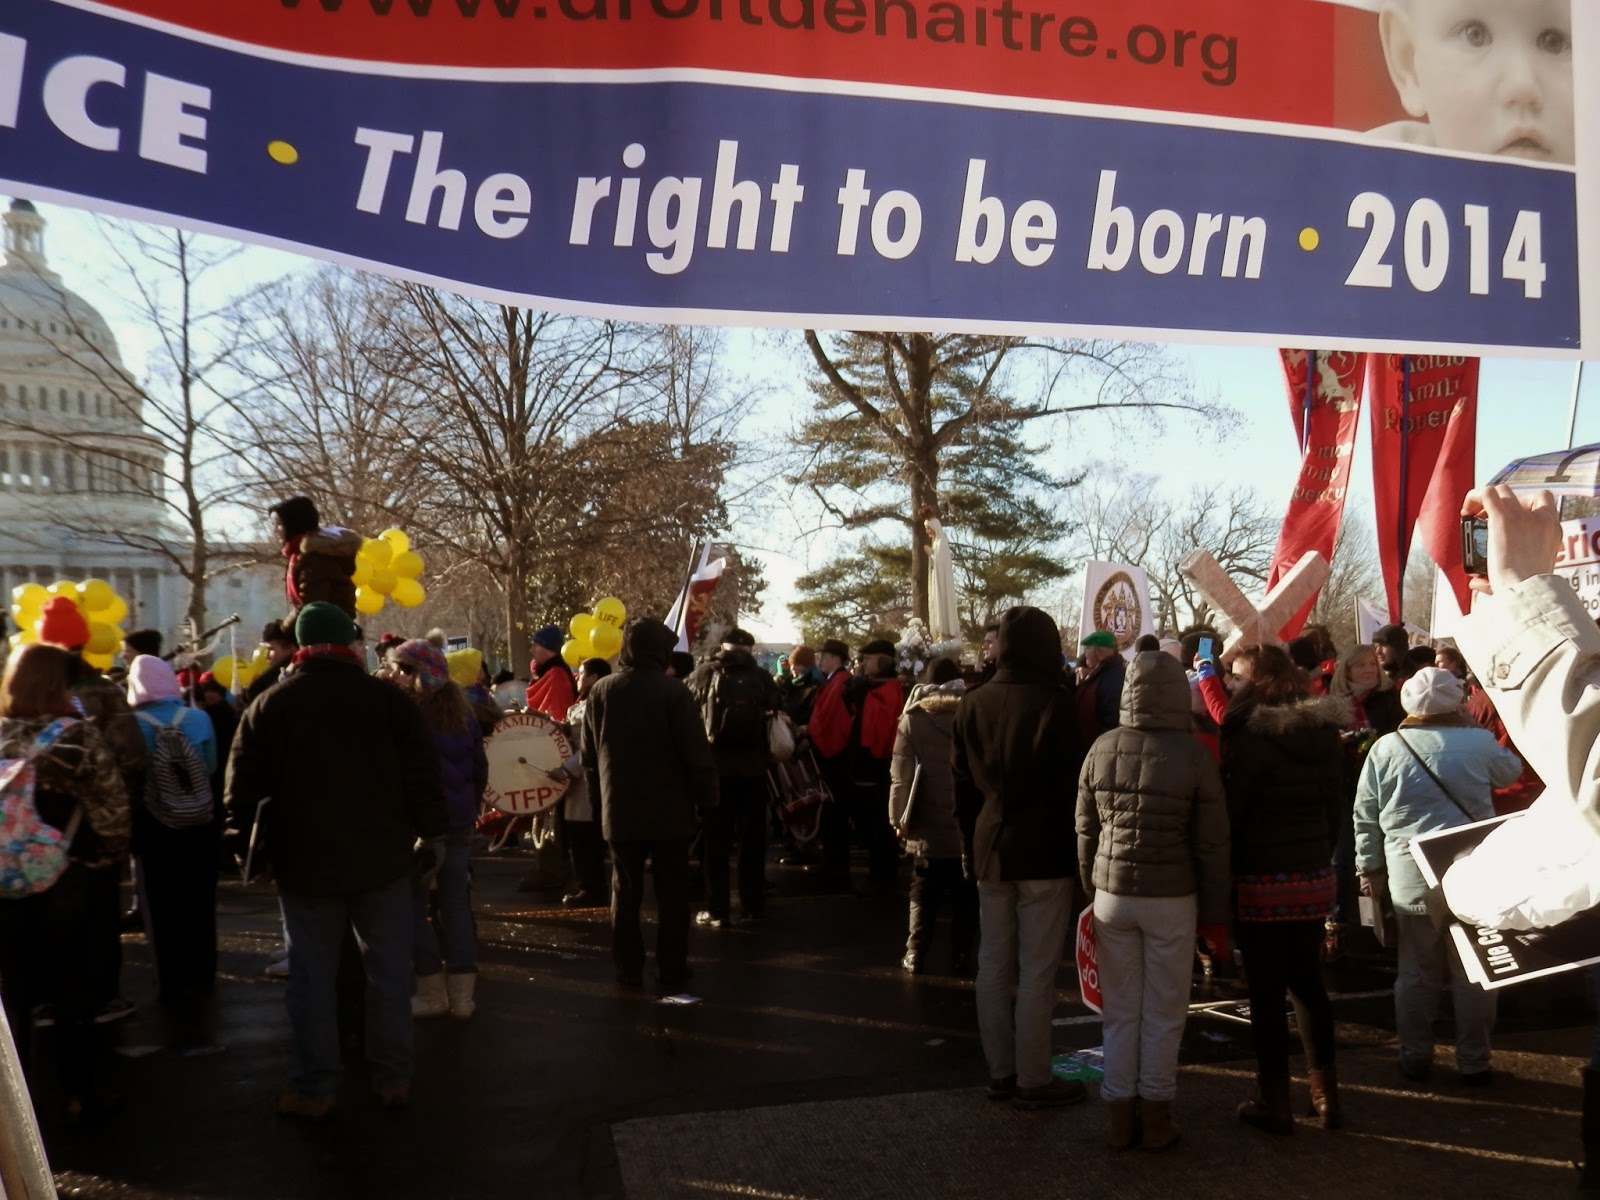 hundreds of thousands gather to march for life each year